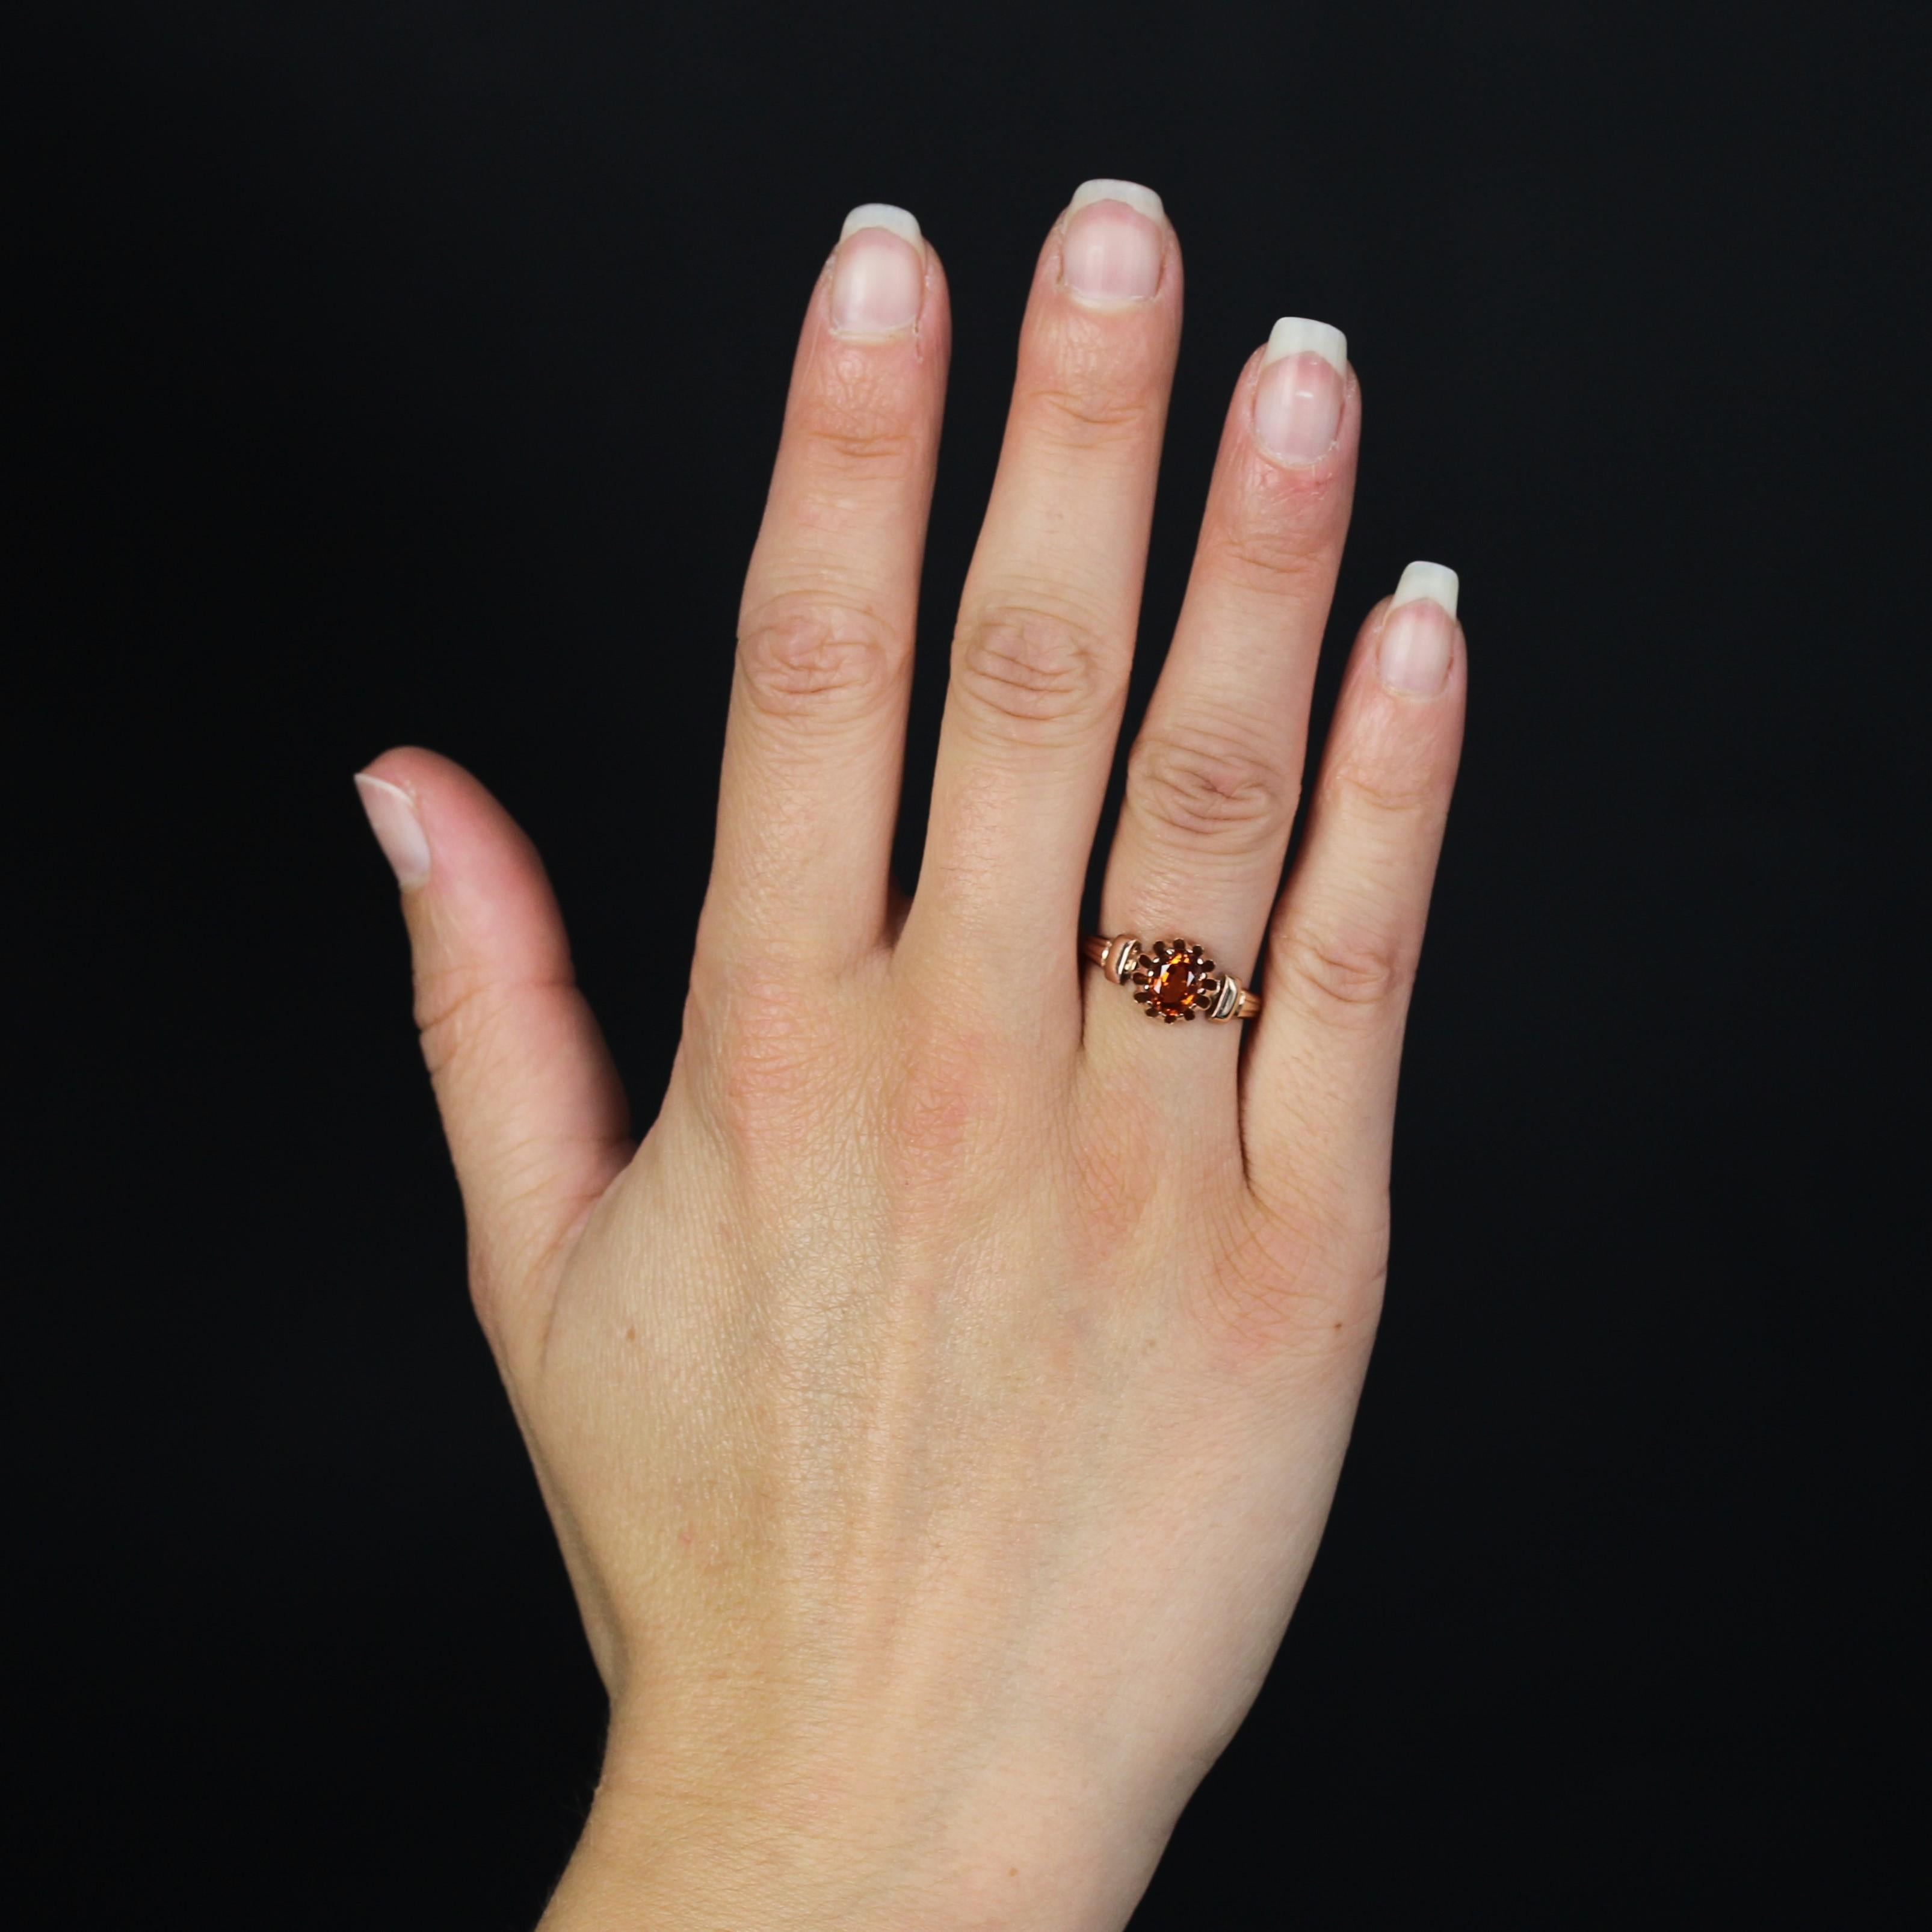 Ring in 18 karat rose gold.
A delightful antique ring with a dahlia setting holding an orange spessartite garnet on either side of the head. The start of the band is formed by a small rectangular motif.
Total garnet weight : 1.20 carats